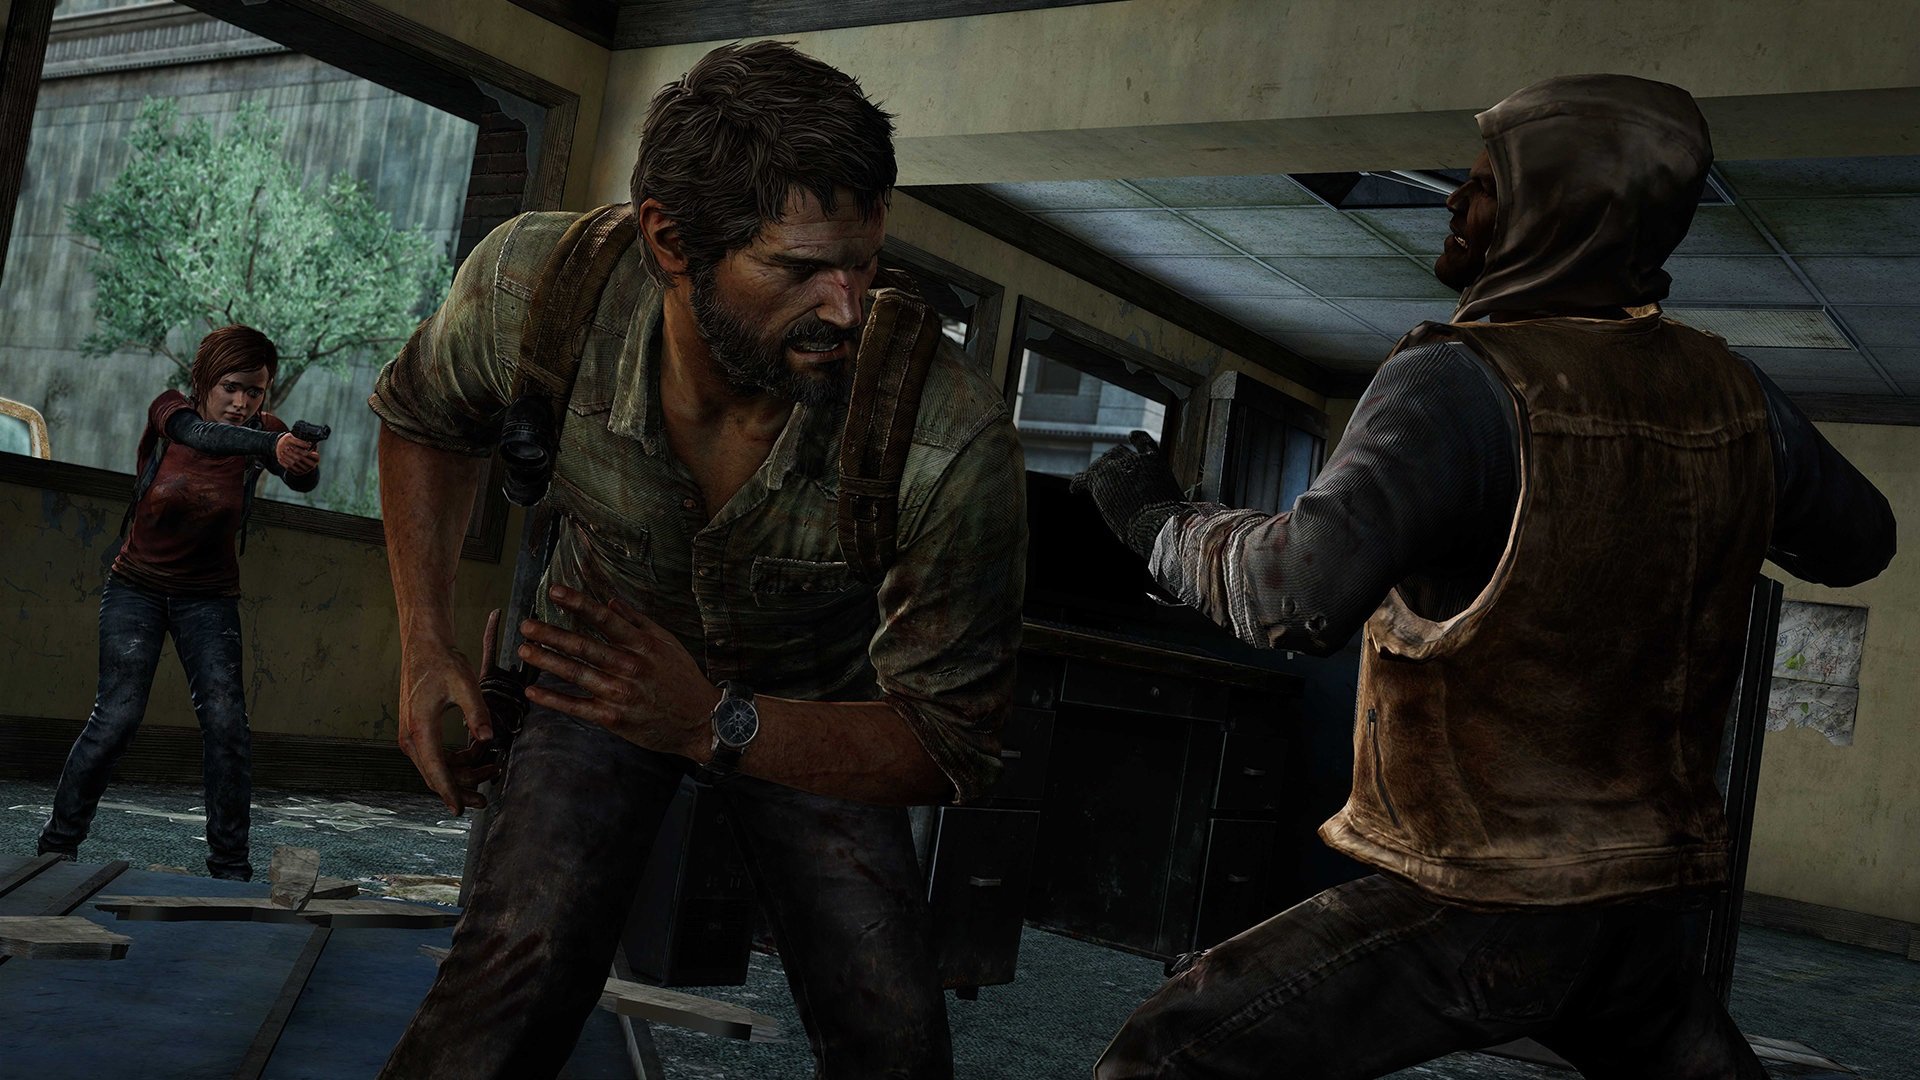 Naughty Dog Confirms The Last of Us Multiplayer is Still Coming